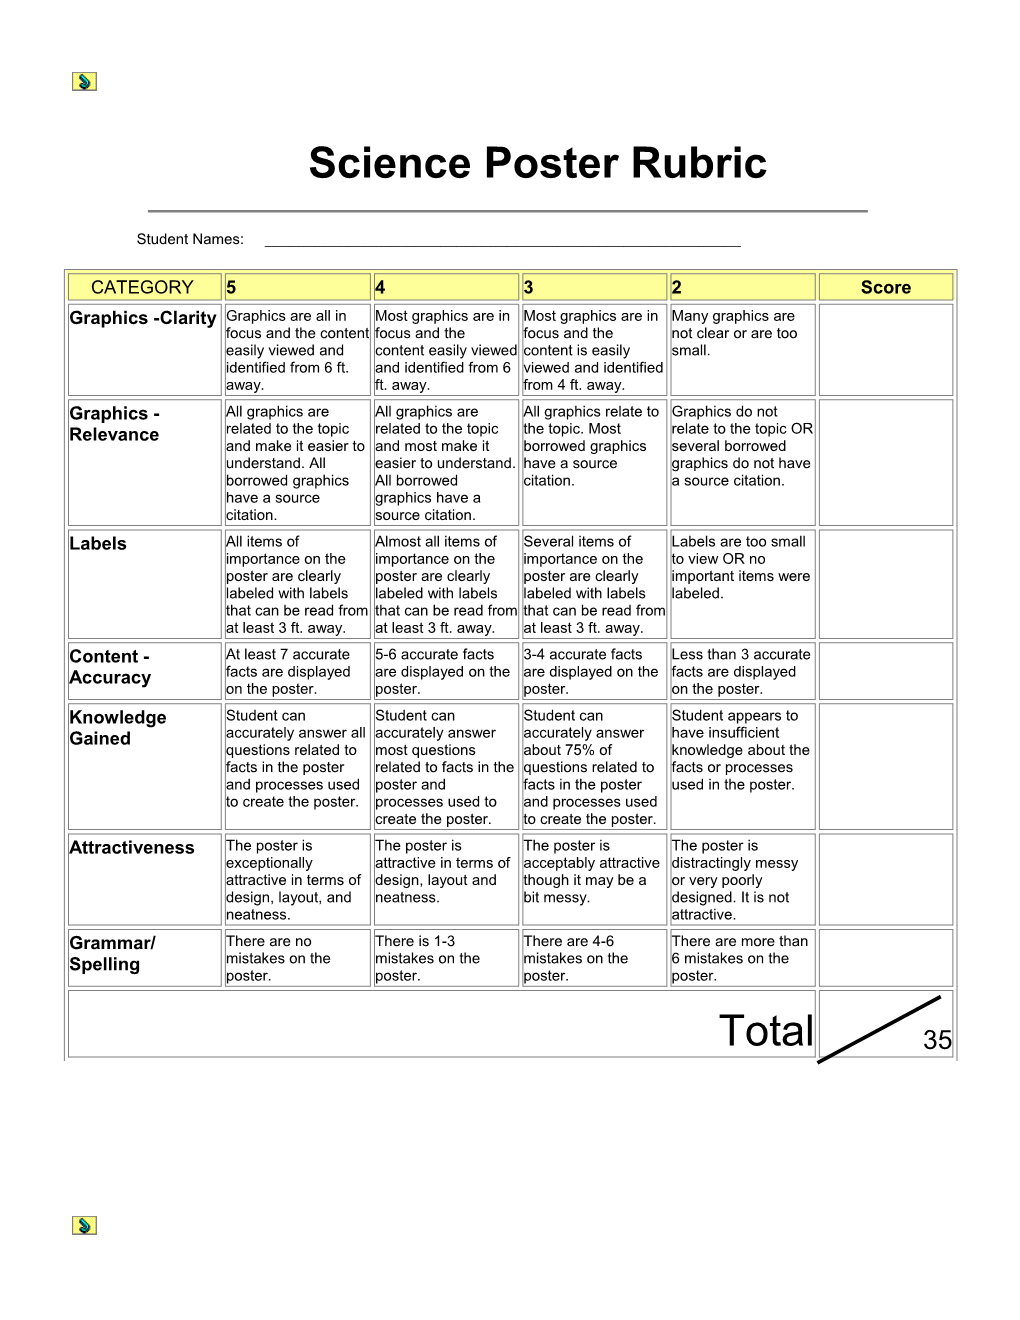 Your Rubric: Making a Poster : Science Poster